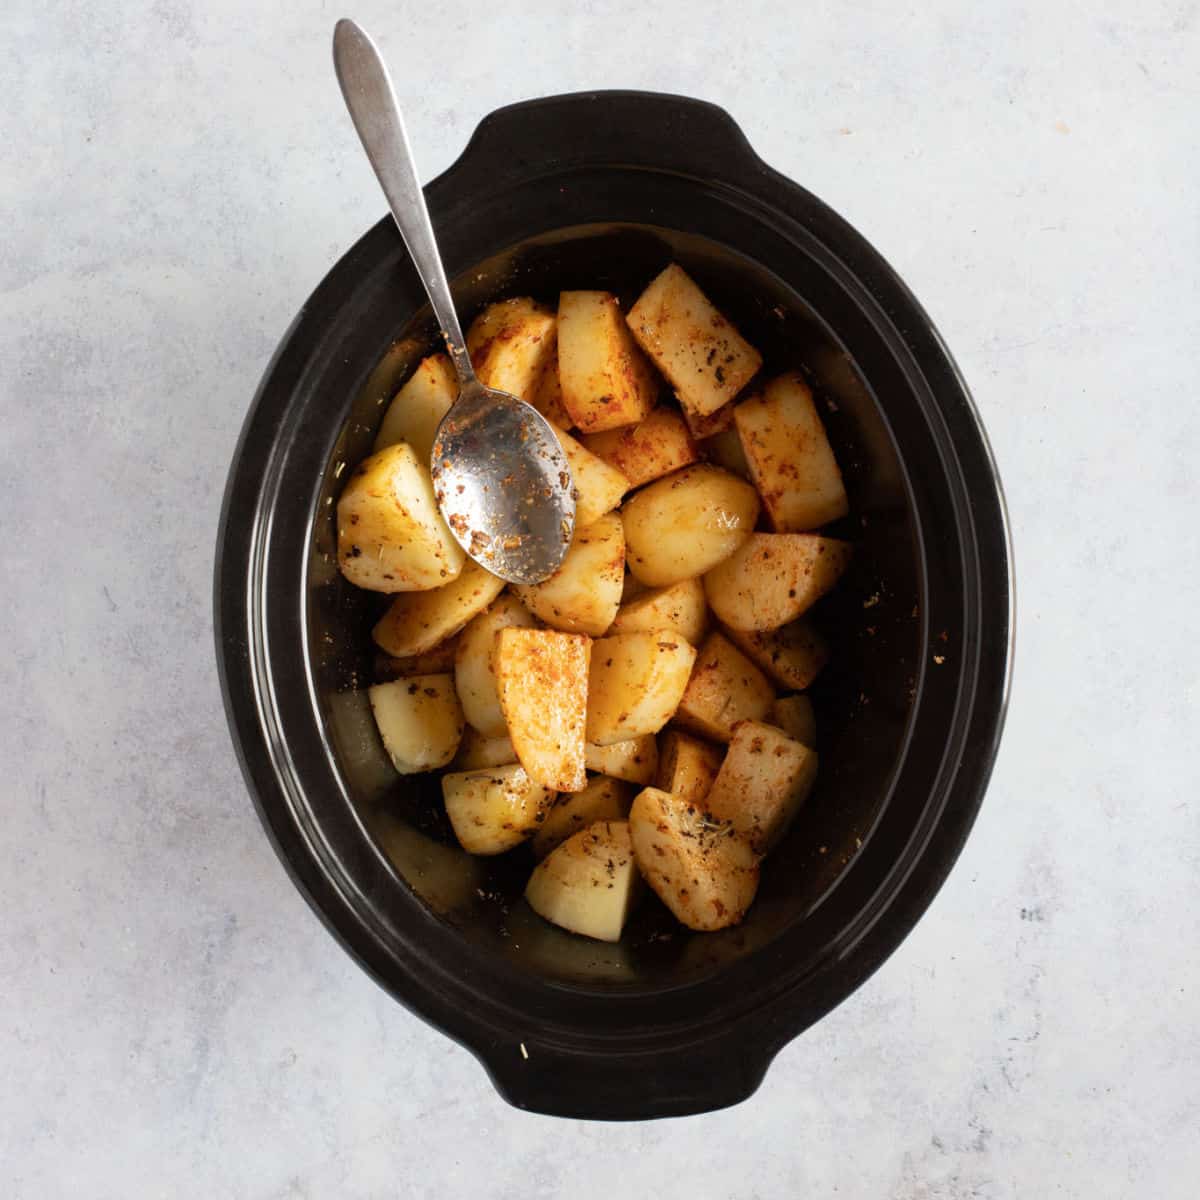 Cooked potatoes in a slow cooker.